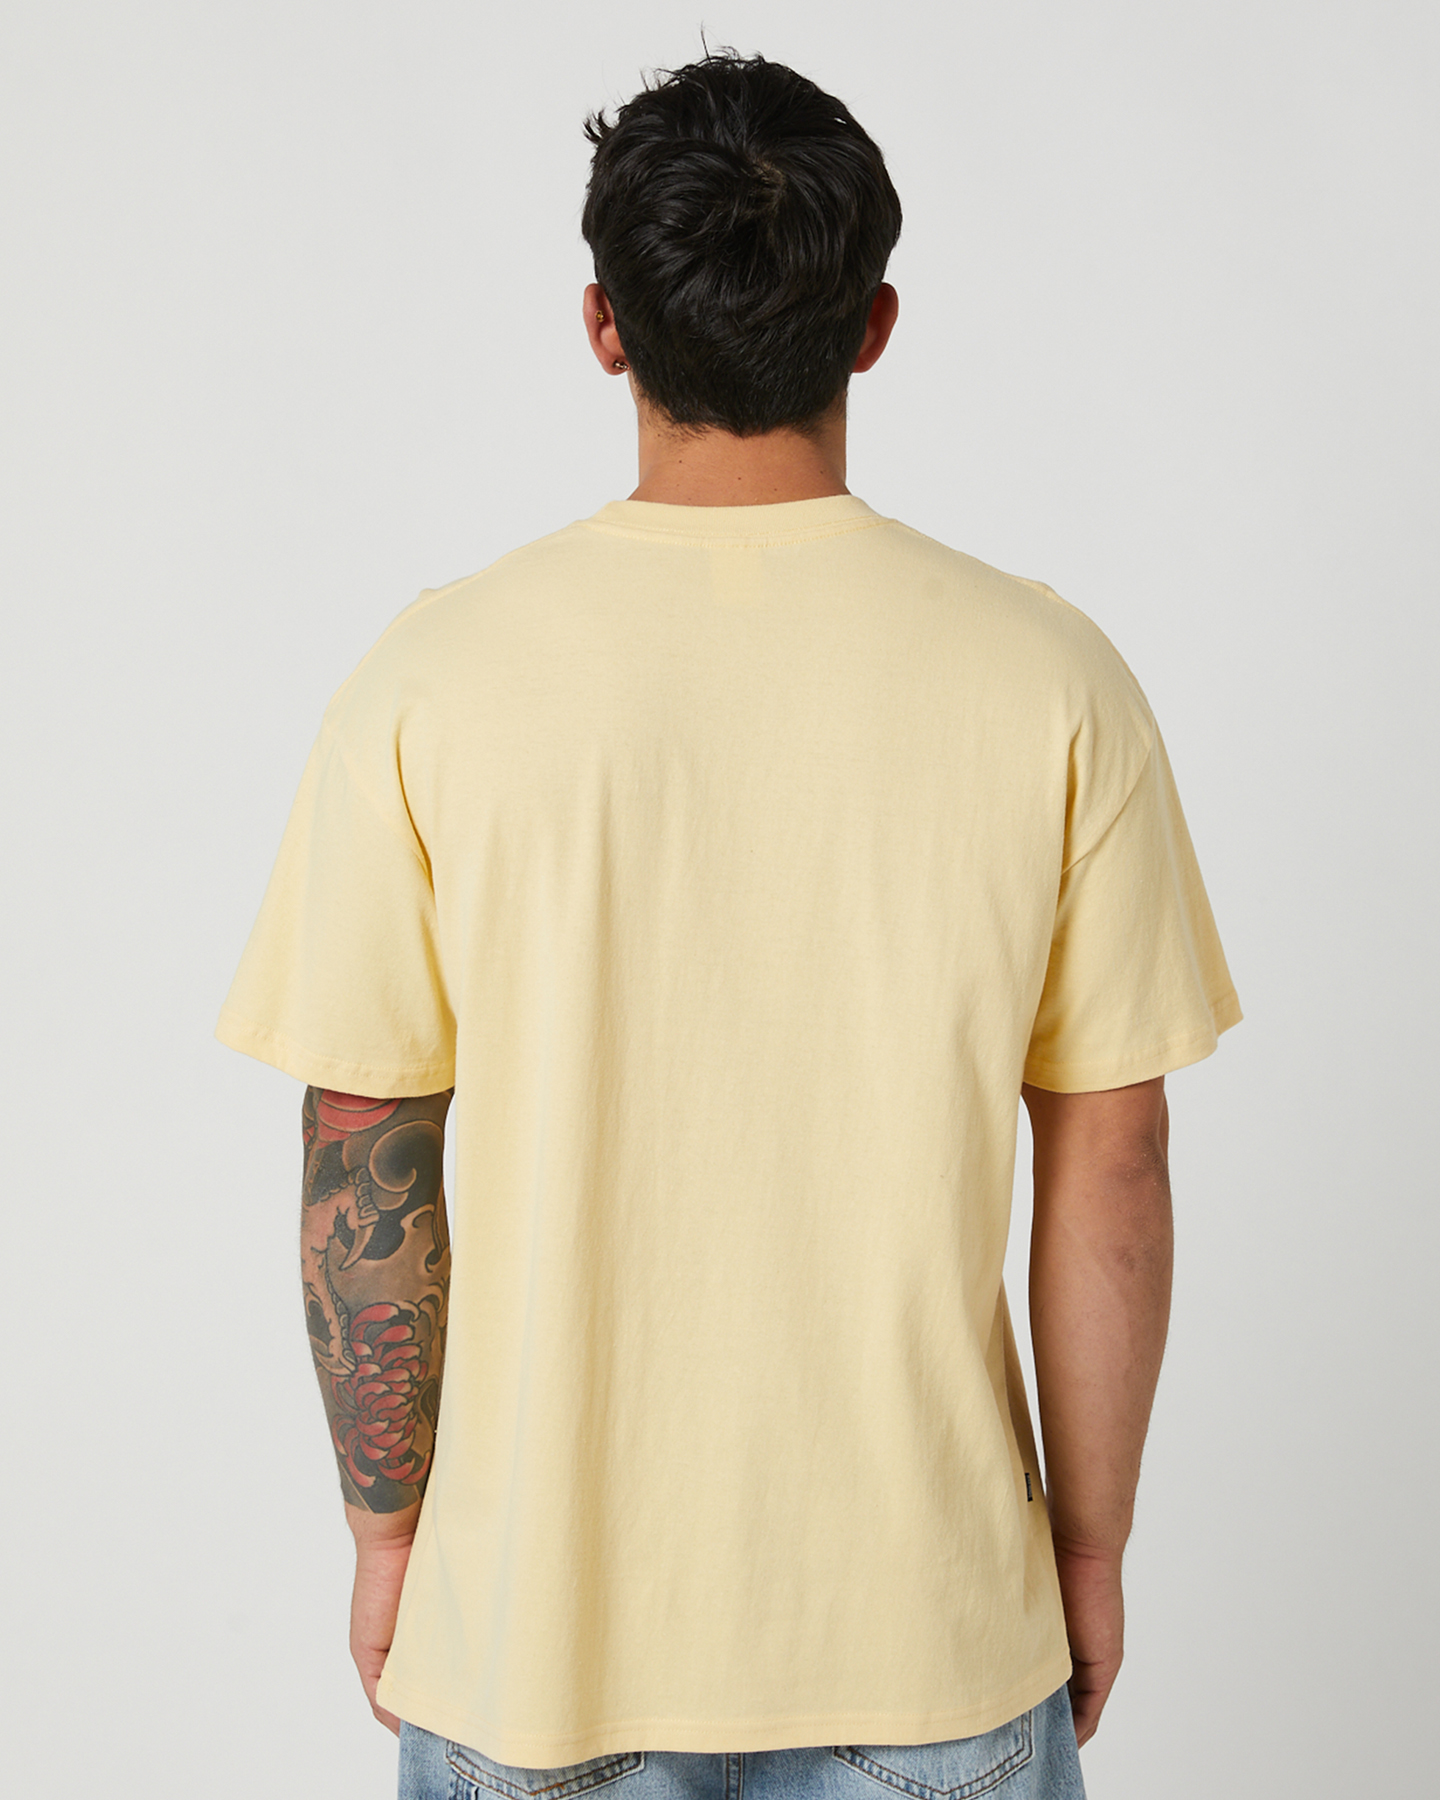 Misfit Gone Moody 50-50 Aaa Ss Tee - Solid Butter | SurfStitch